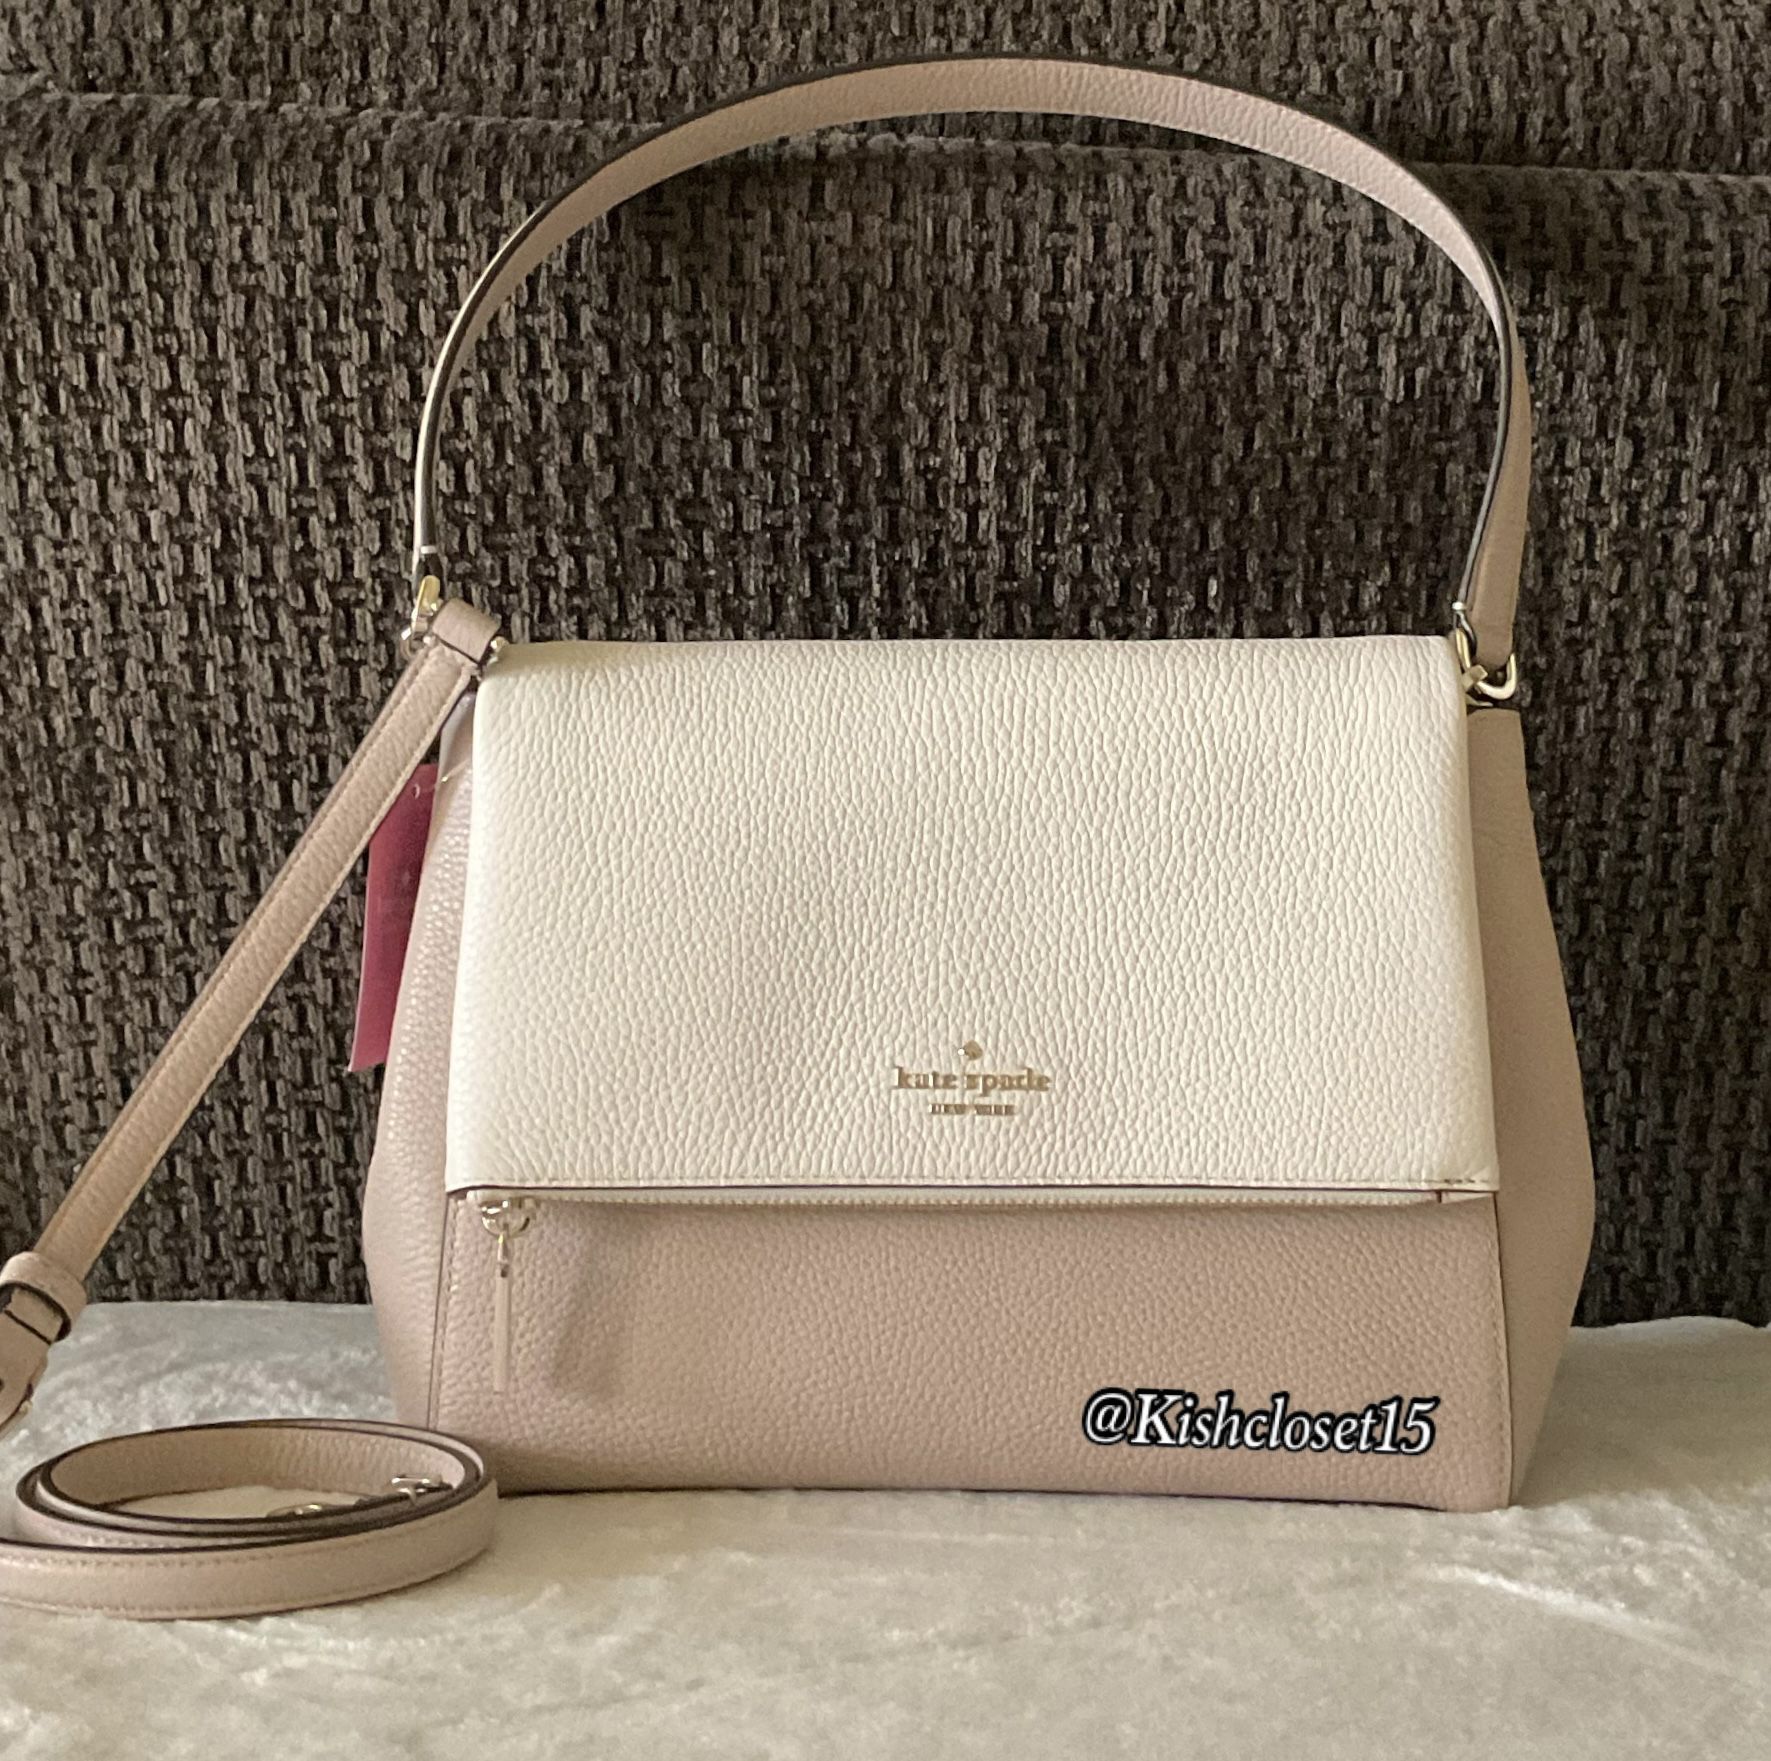 NWT AUTHENTIC Kate Spade Leila Medium Leather Colorblock Shoulder Bag for  Sale in Upland, CA - OfferUp